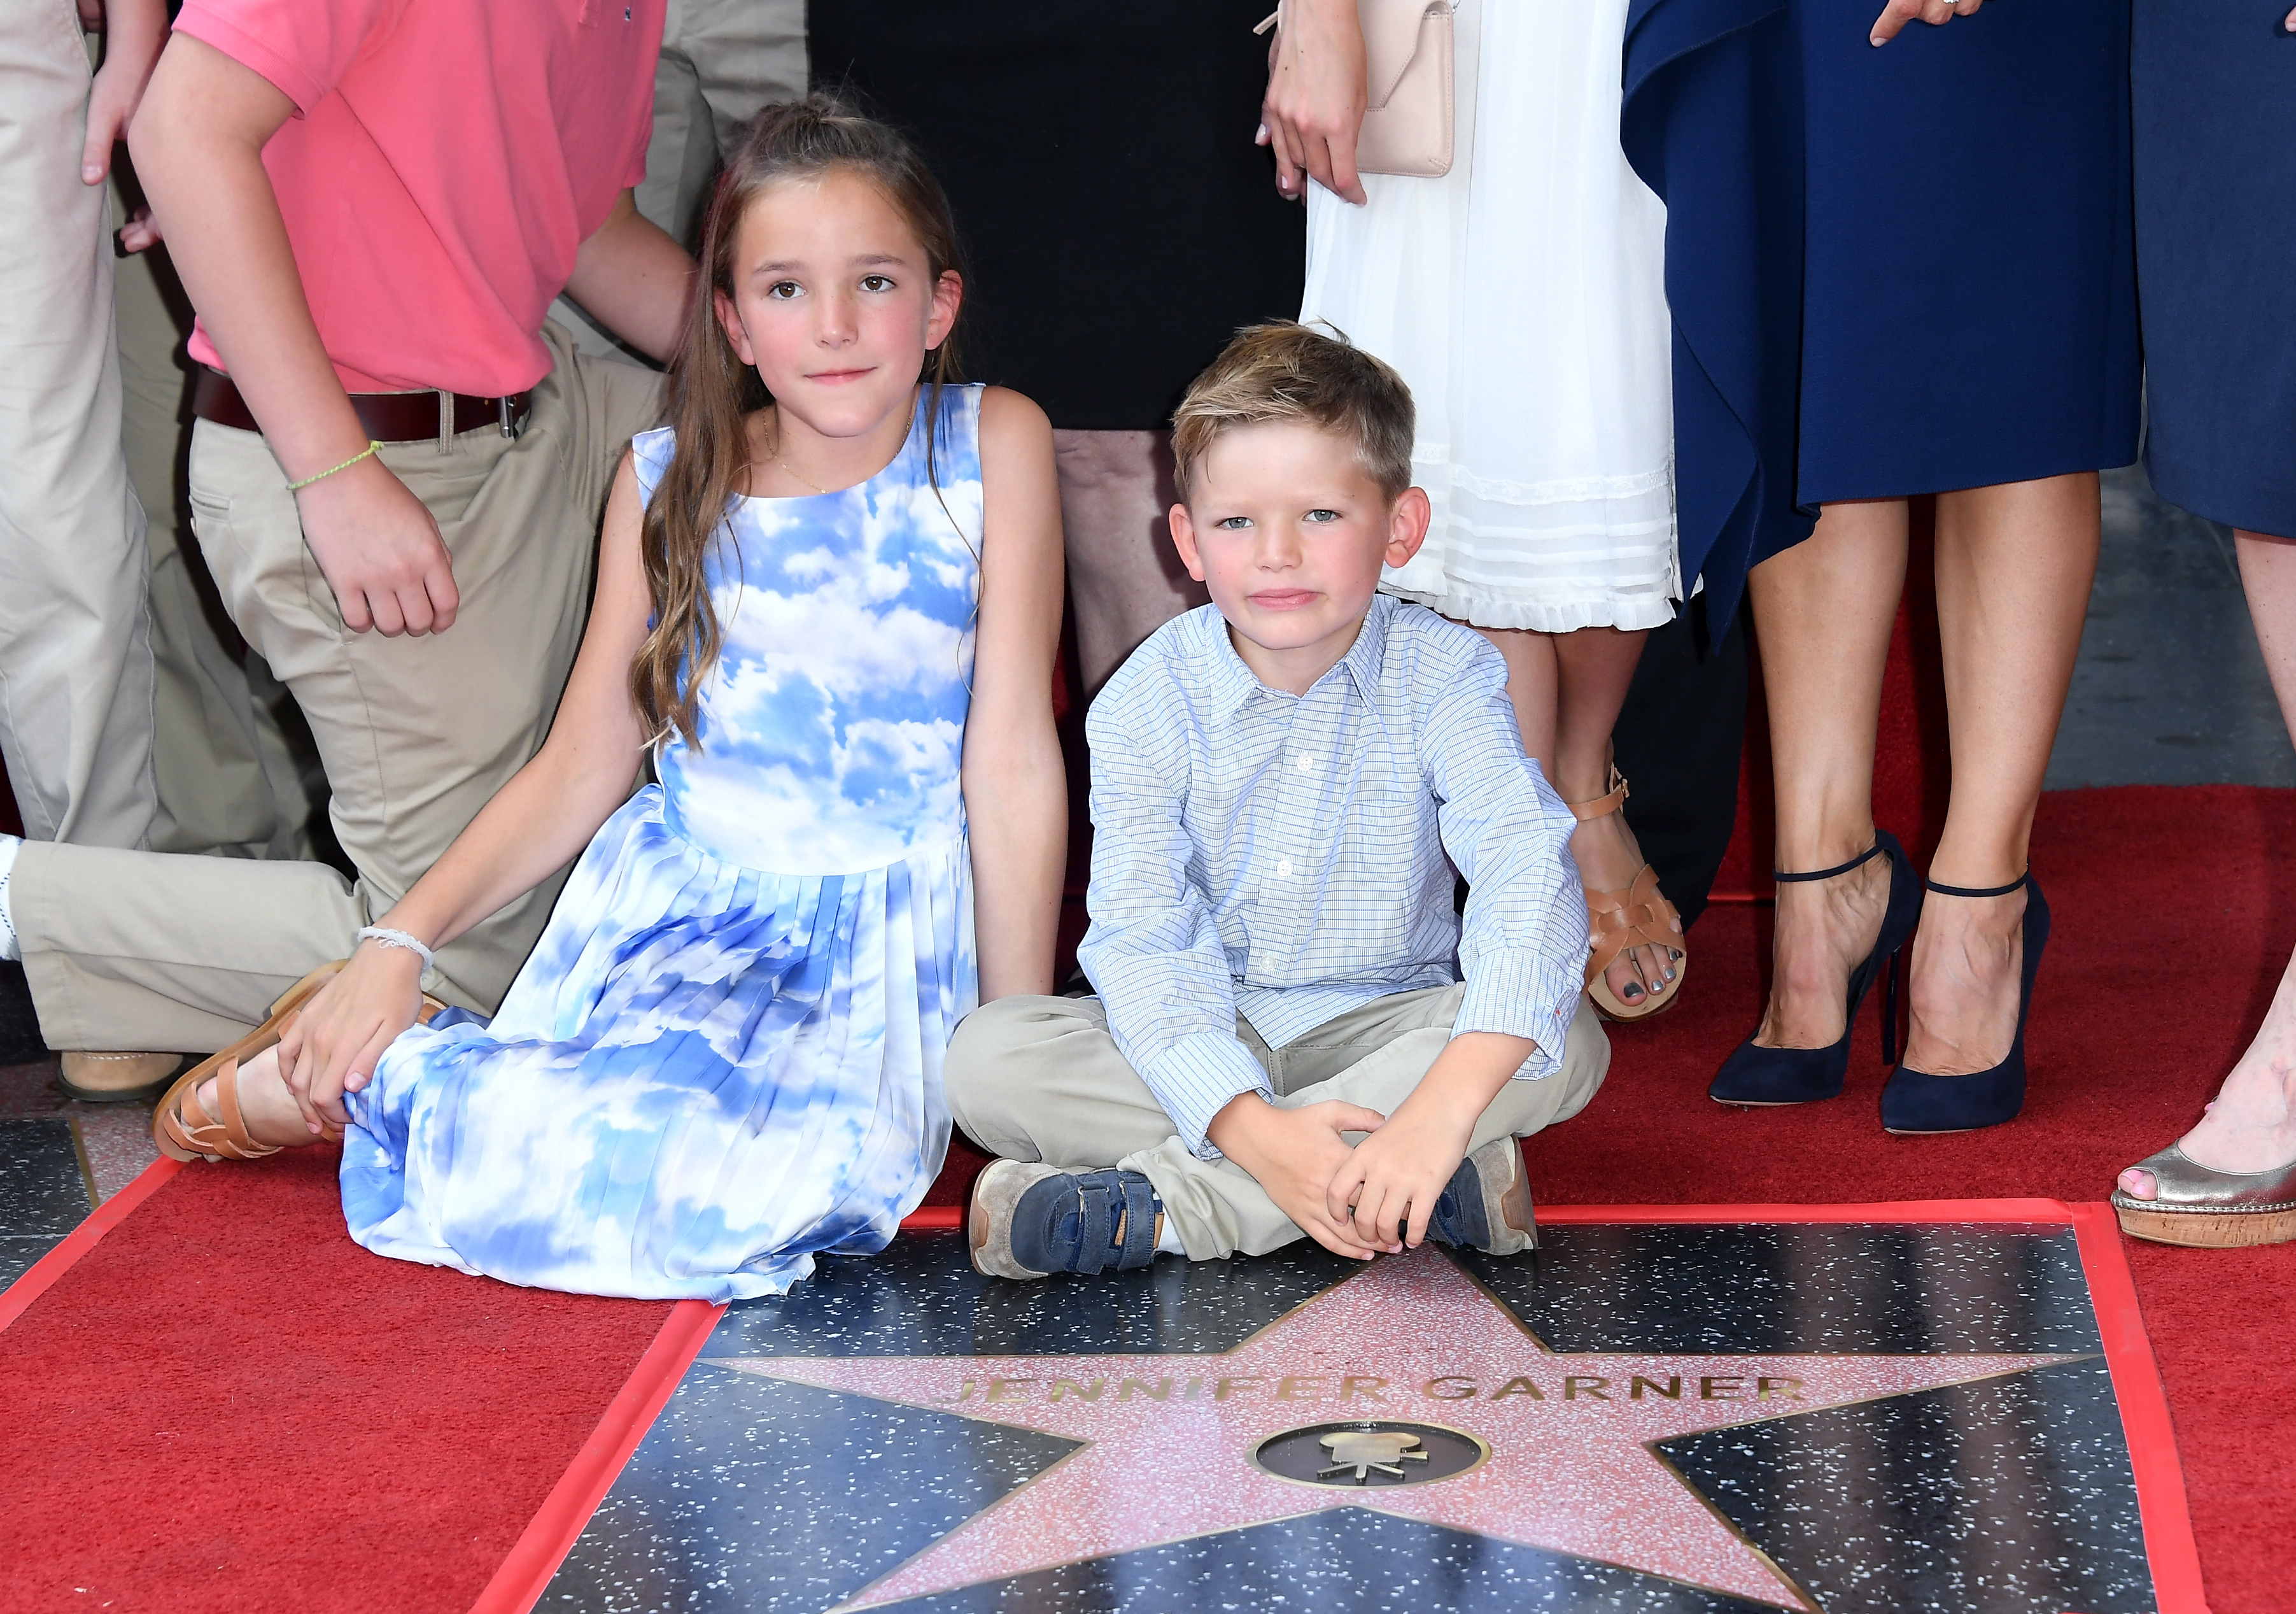 Seraphina Rose Elizabeth Affleck and Samuel Garner Affleck at the ceremony honoring Jennifer Garner with a star on the Hollywood Walk of Fame in Hollywood, California on August 20, 2018 | Source: Getty Images